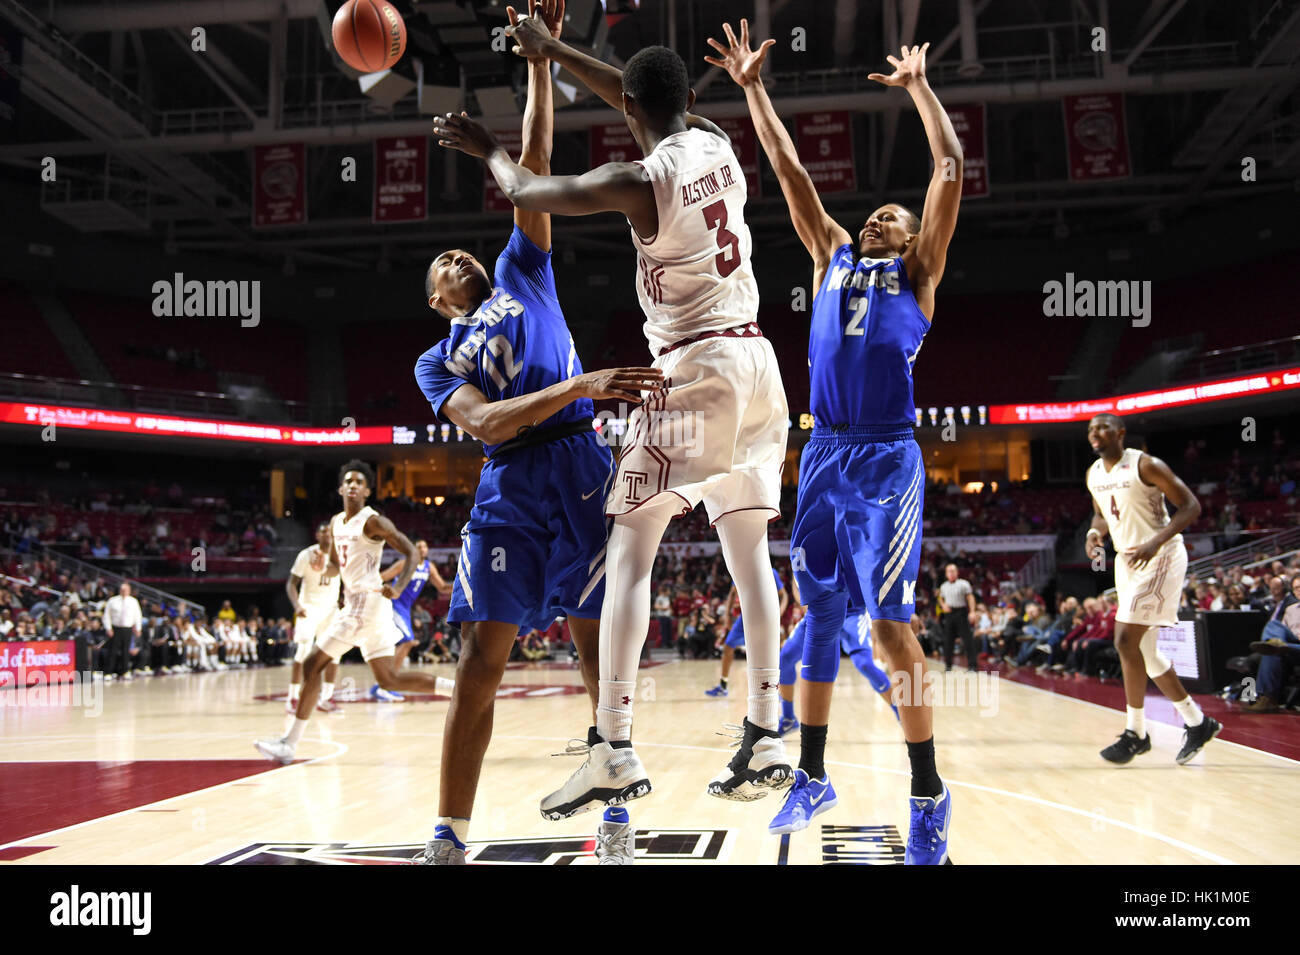 Philadelphia, Pennsylvania, USA. 25th Jan, 2017. Temple Owls guard SHIZZ ALSTON JR. (3) passes out of a double team trap during the American Athletic Conference basketball game being played at the Liacouras Center in Philadelphia. Temple beat Memphis 77-66. Credit: Ken Inness/ZUMA Wire/Alamy Live News Stock Photo